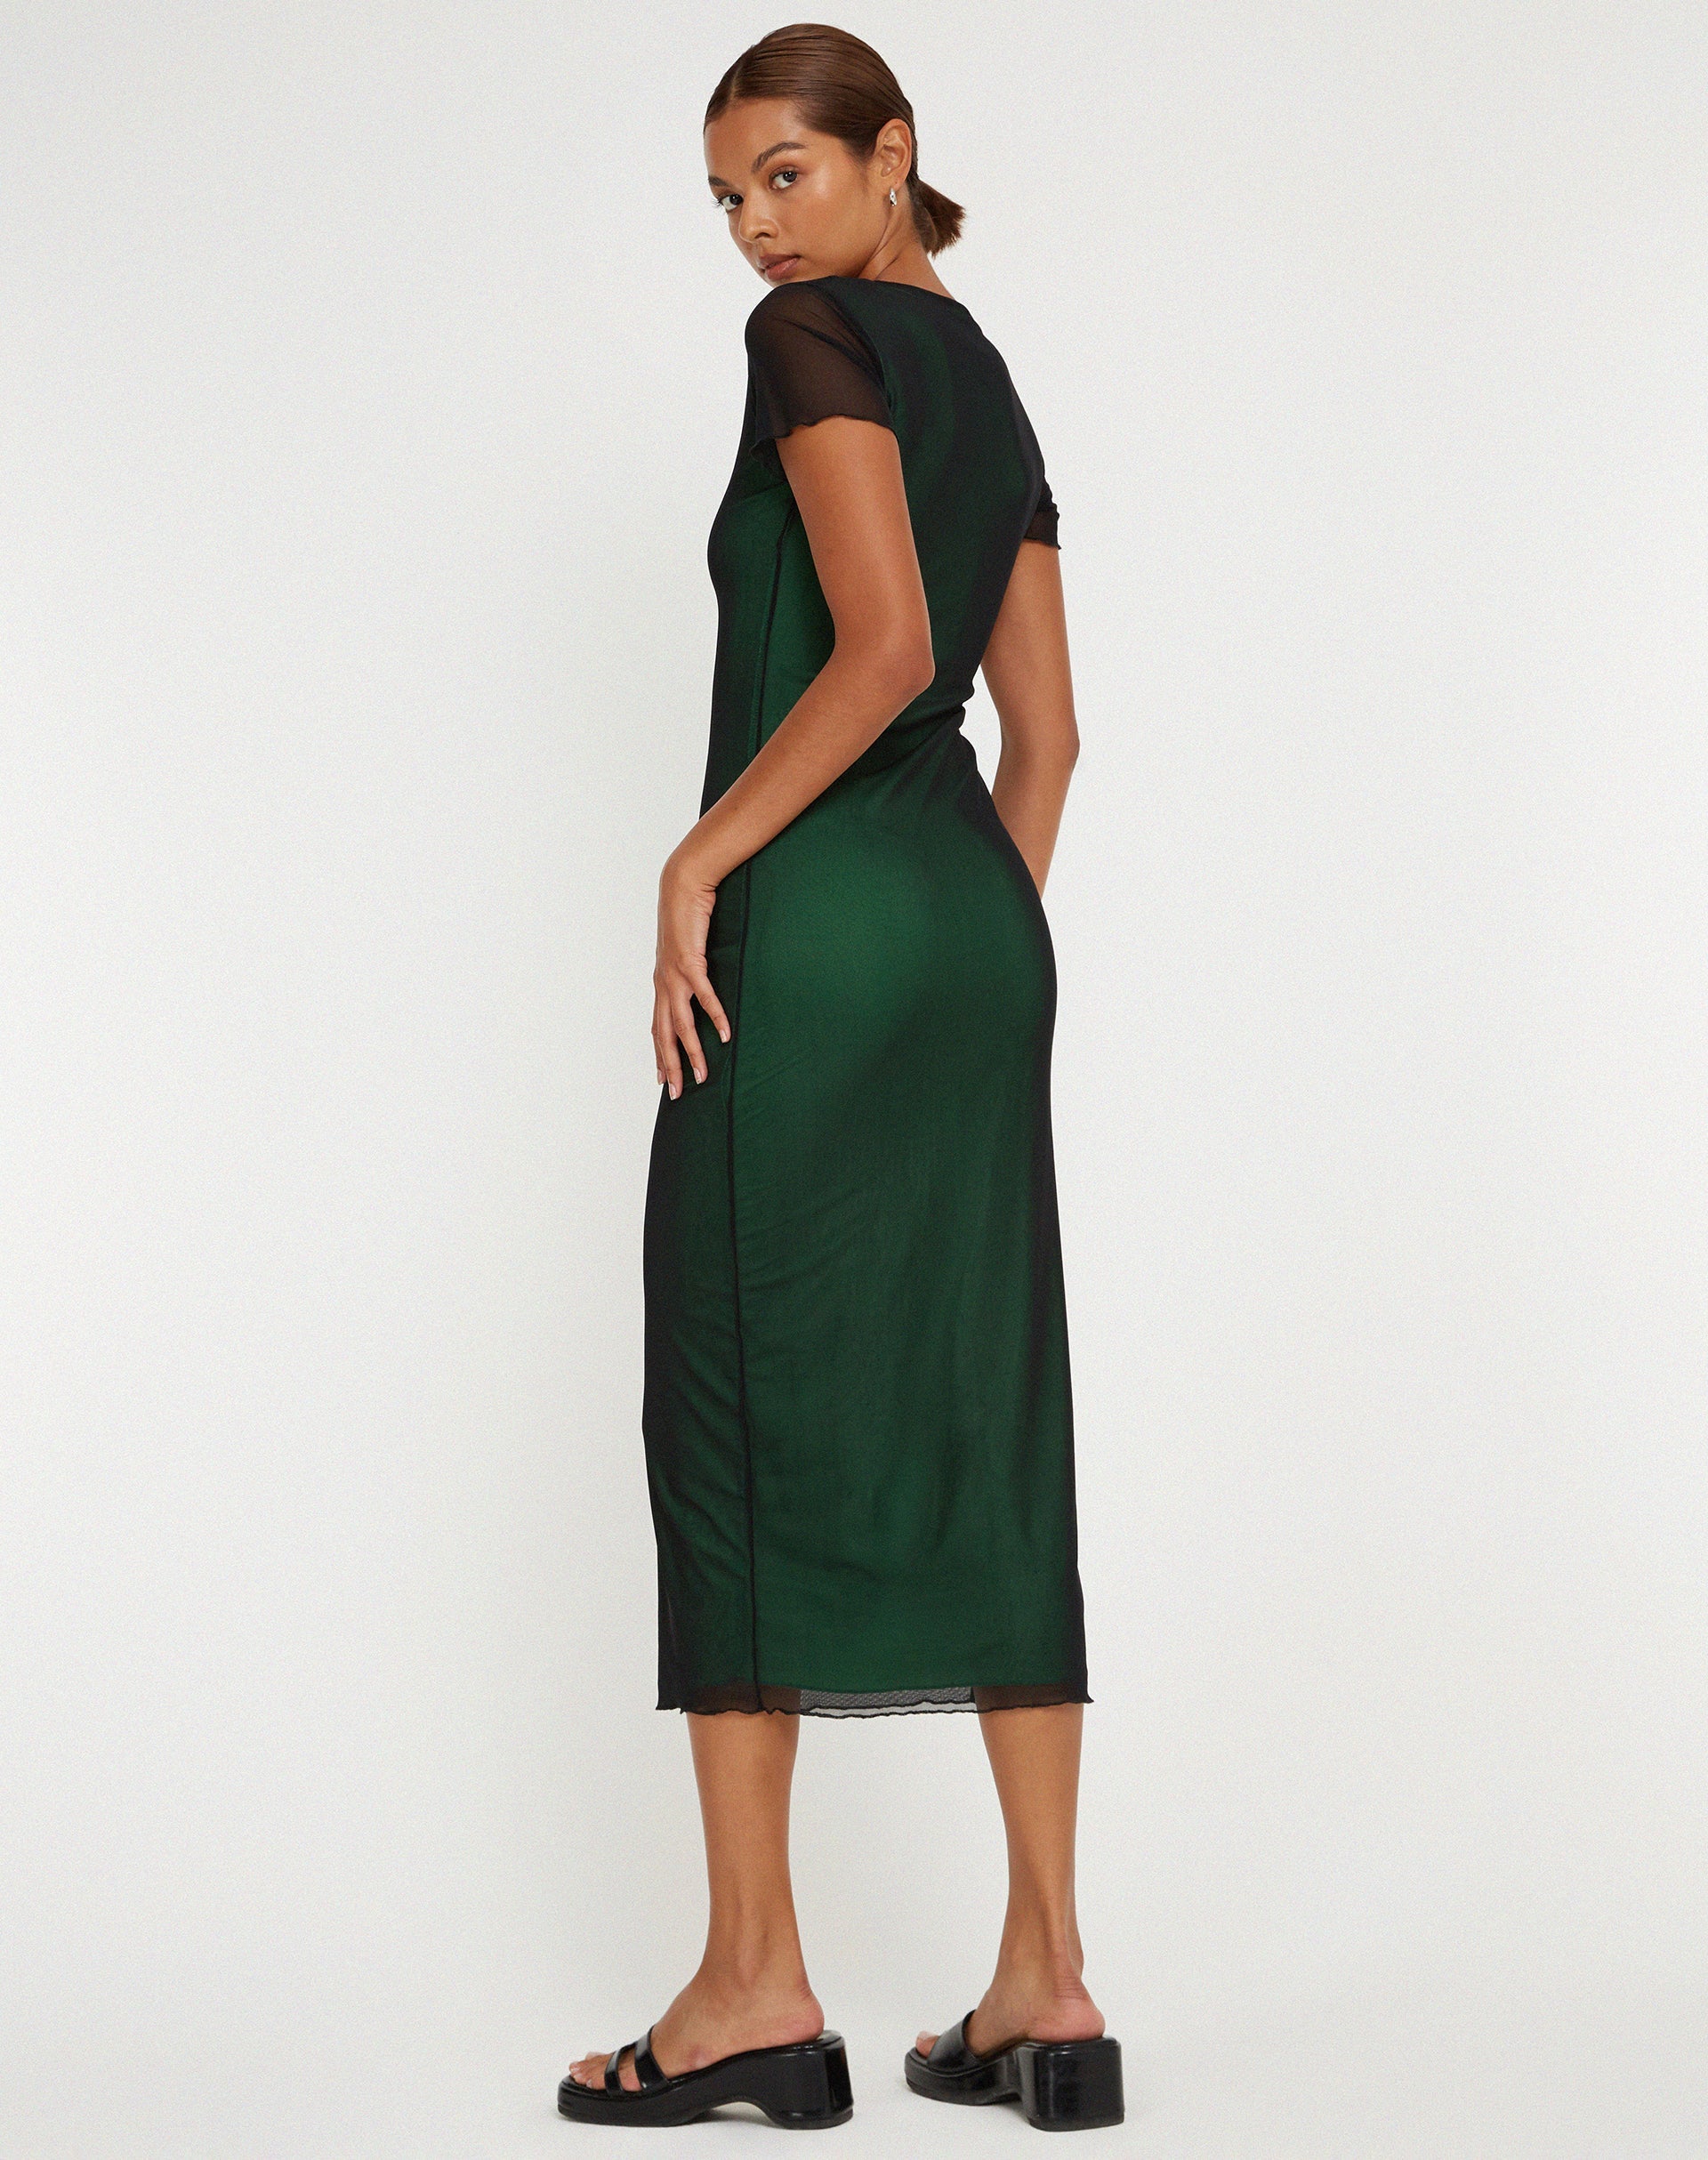 image of Roska Midi Dress in Black with Vibrant Green Lining